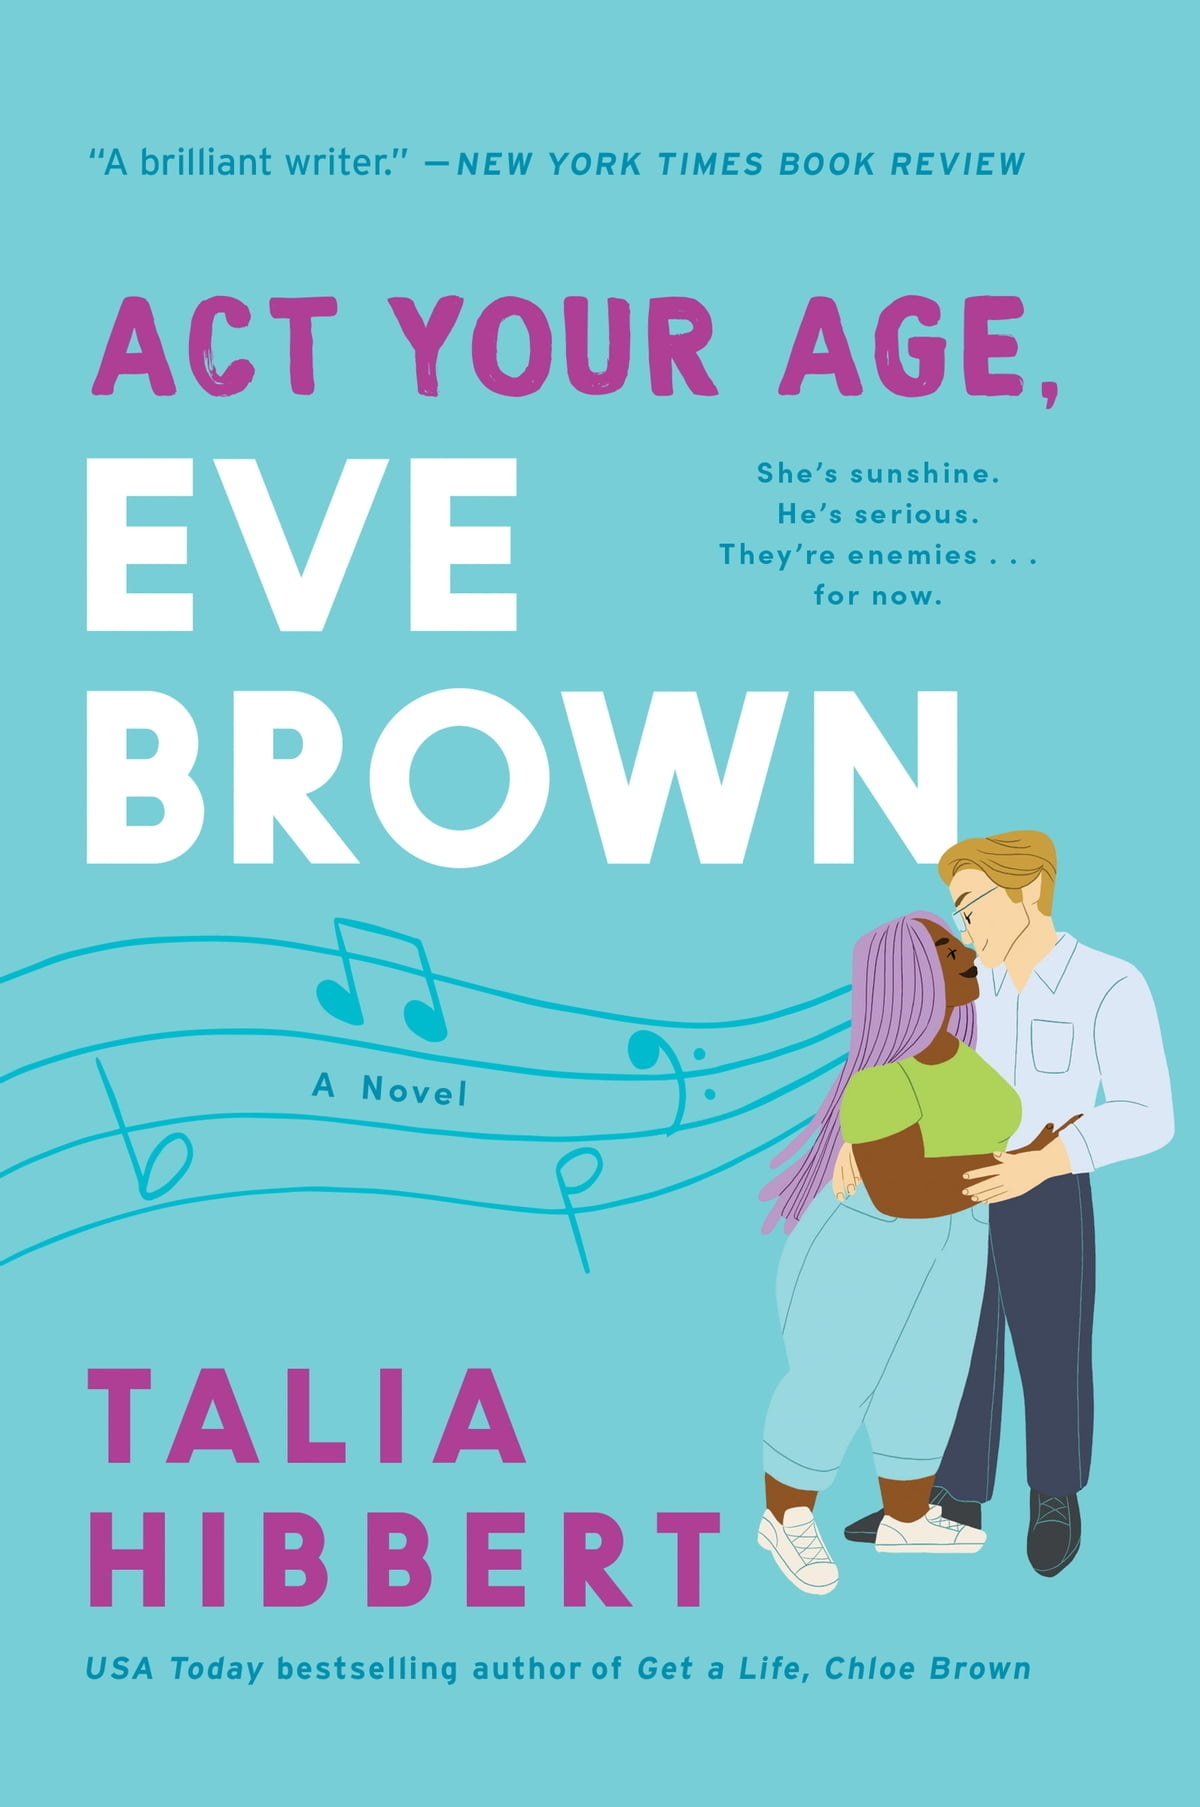 Act Your Age, Eve Brown book cover. Book by Talia Hibbert